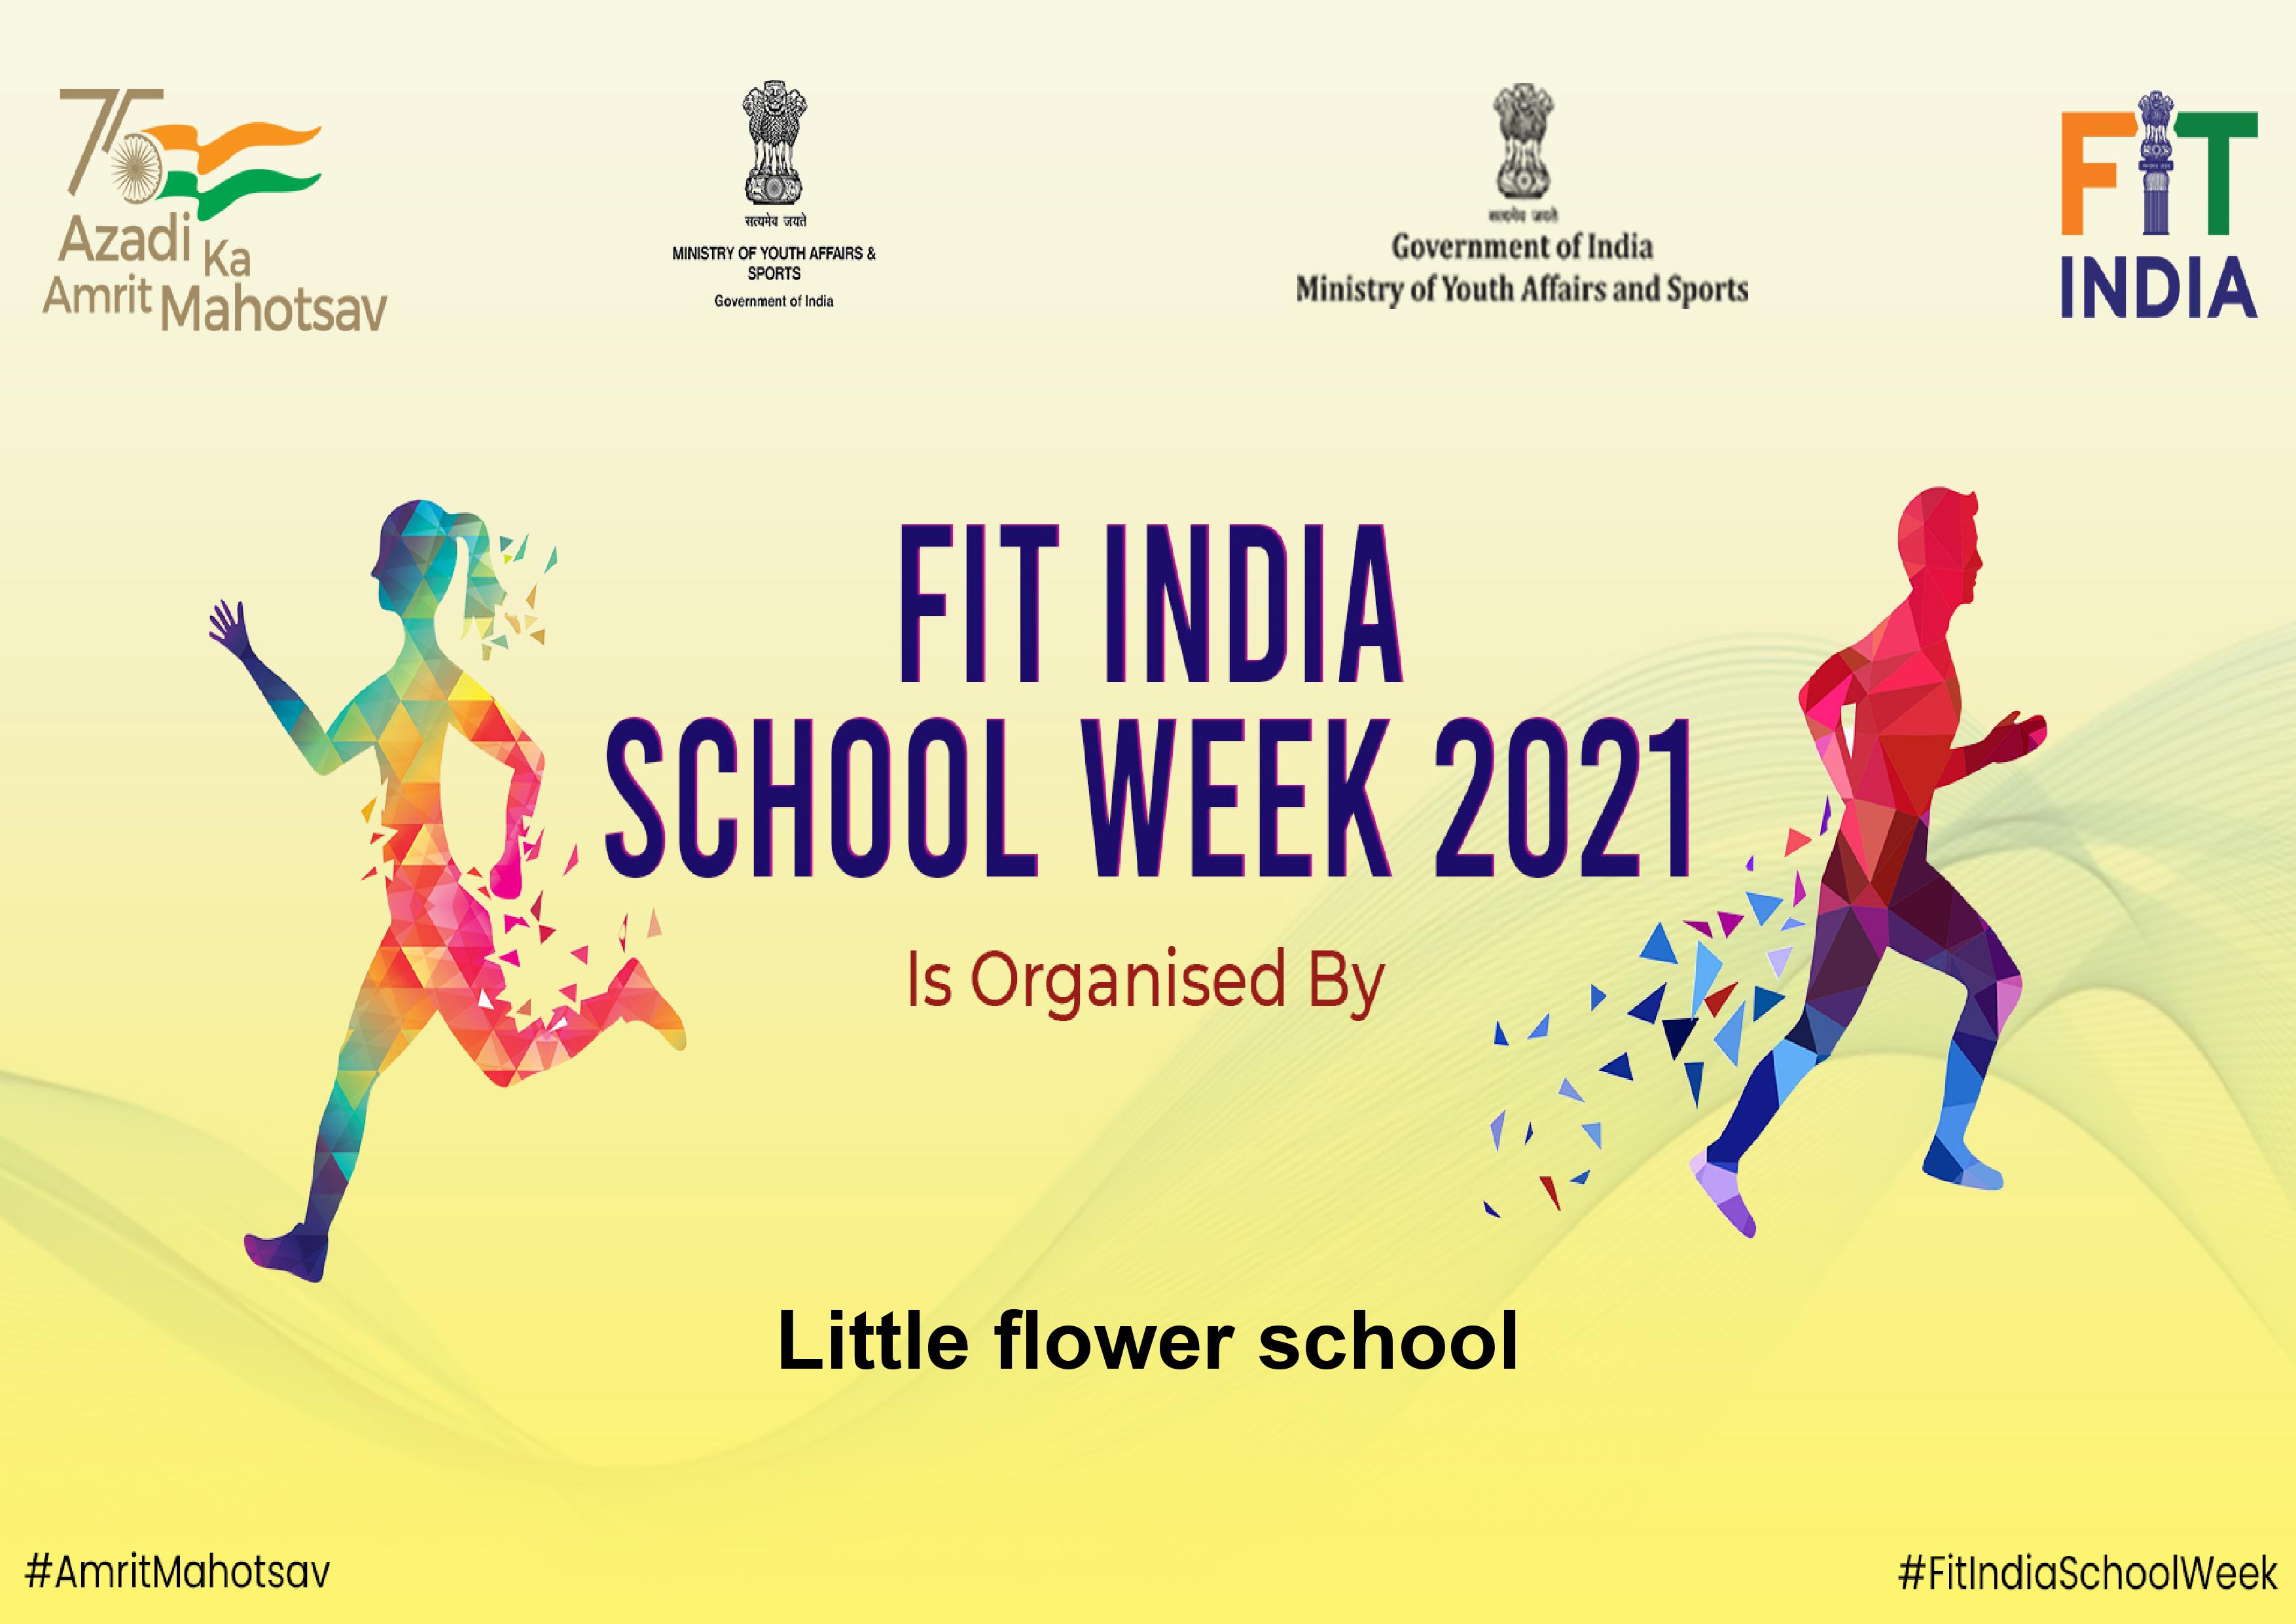 Fit India Show Events